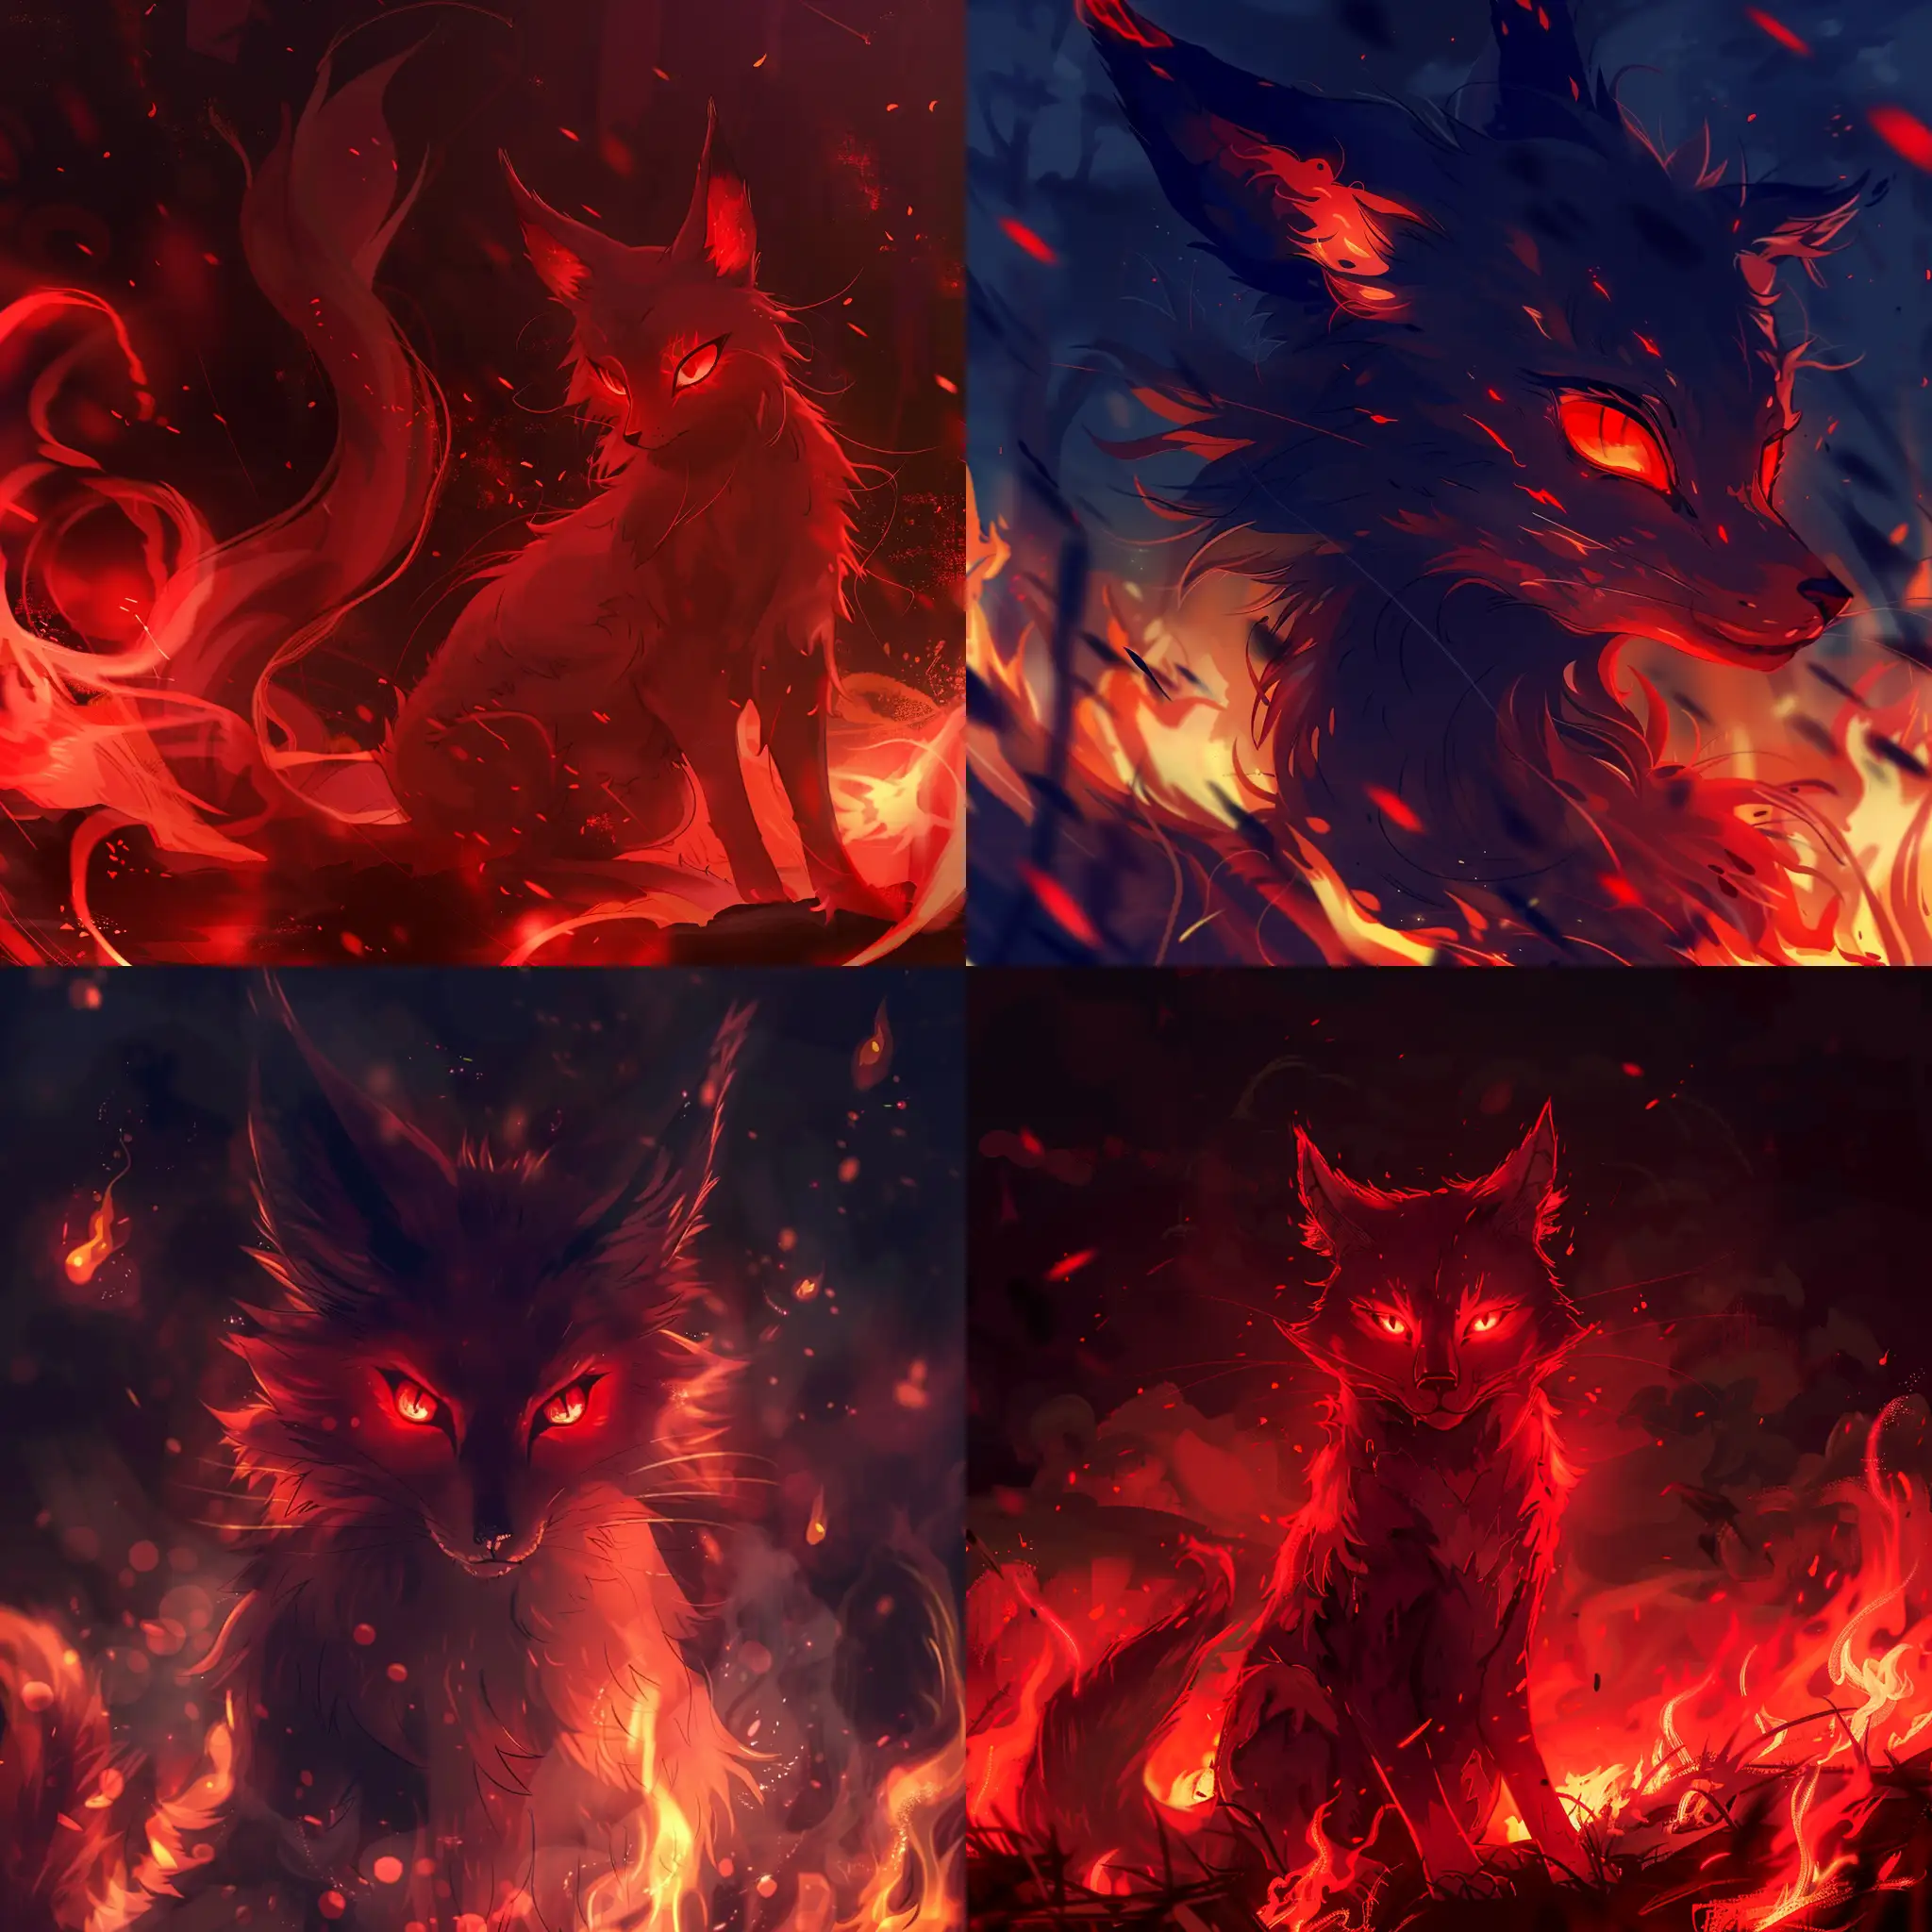 Mystical-Fire-Elemental-Kitsune-with-Nine-Tails-in-Anime-Style